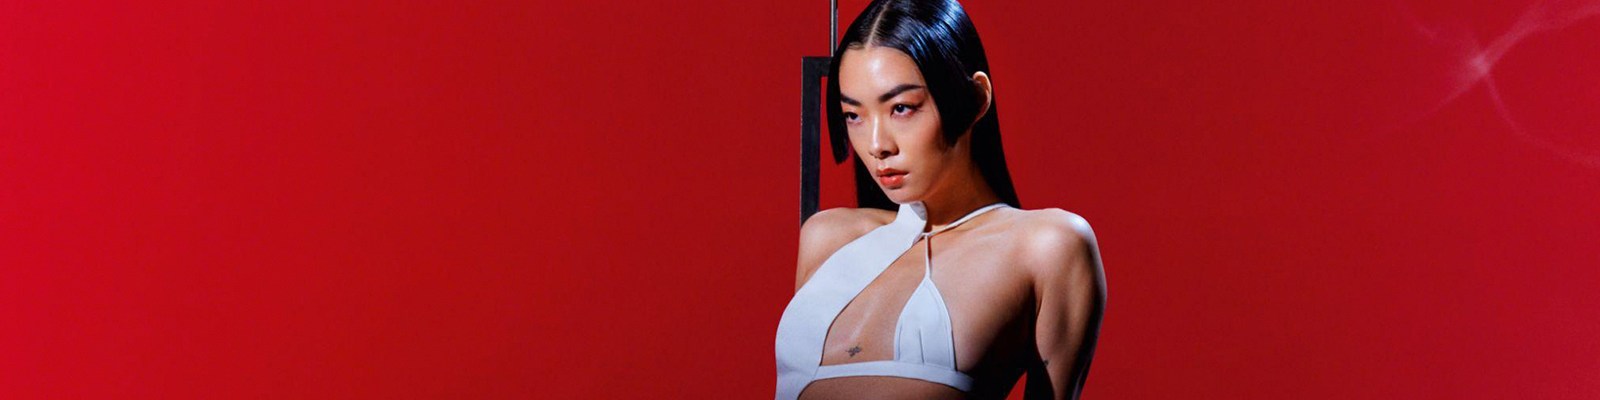 Rina Sawayama Repackages Therapeutic Breakthroughs On ‘Hold The Girl’